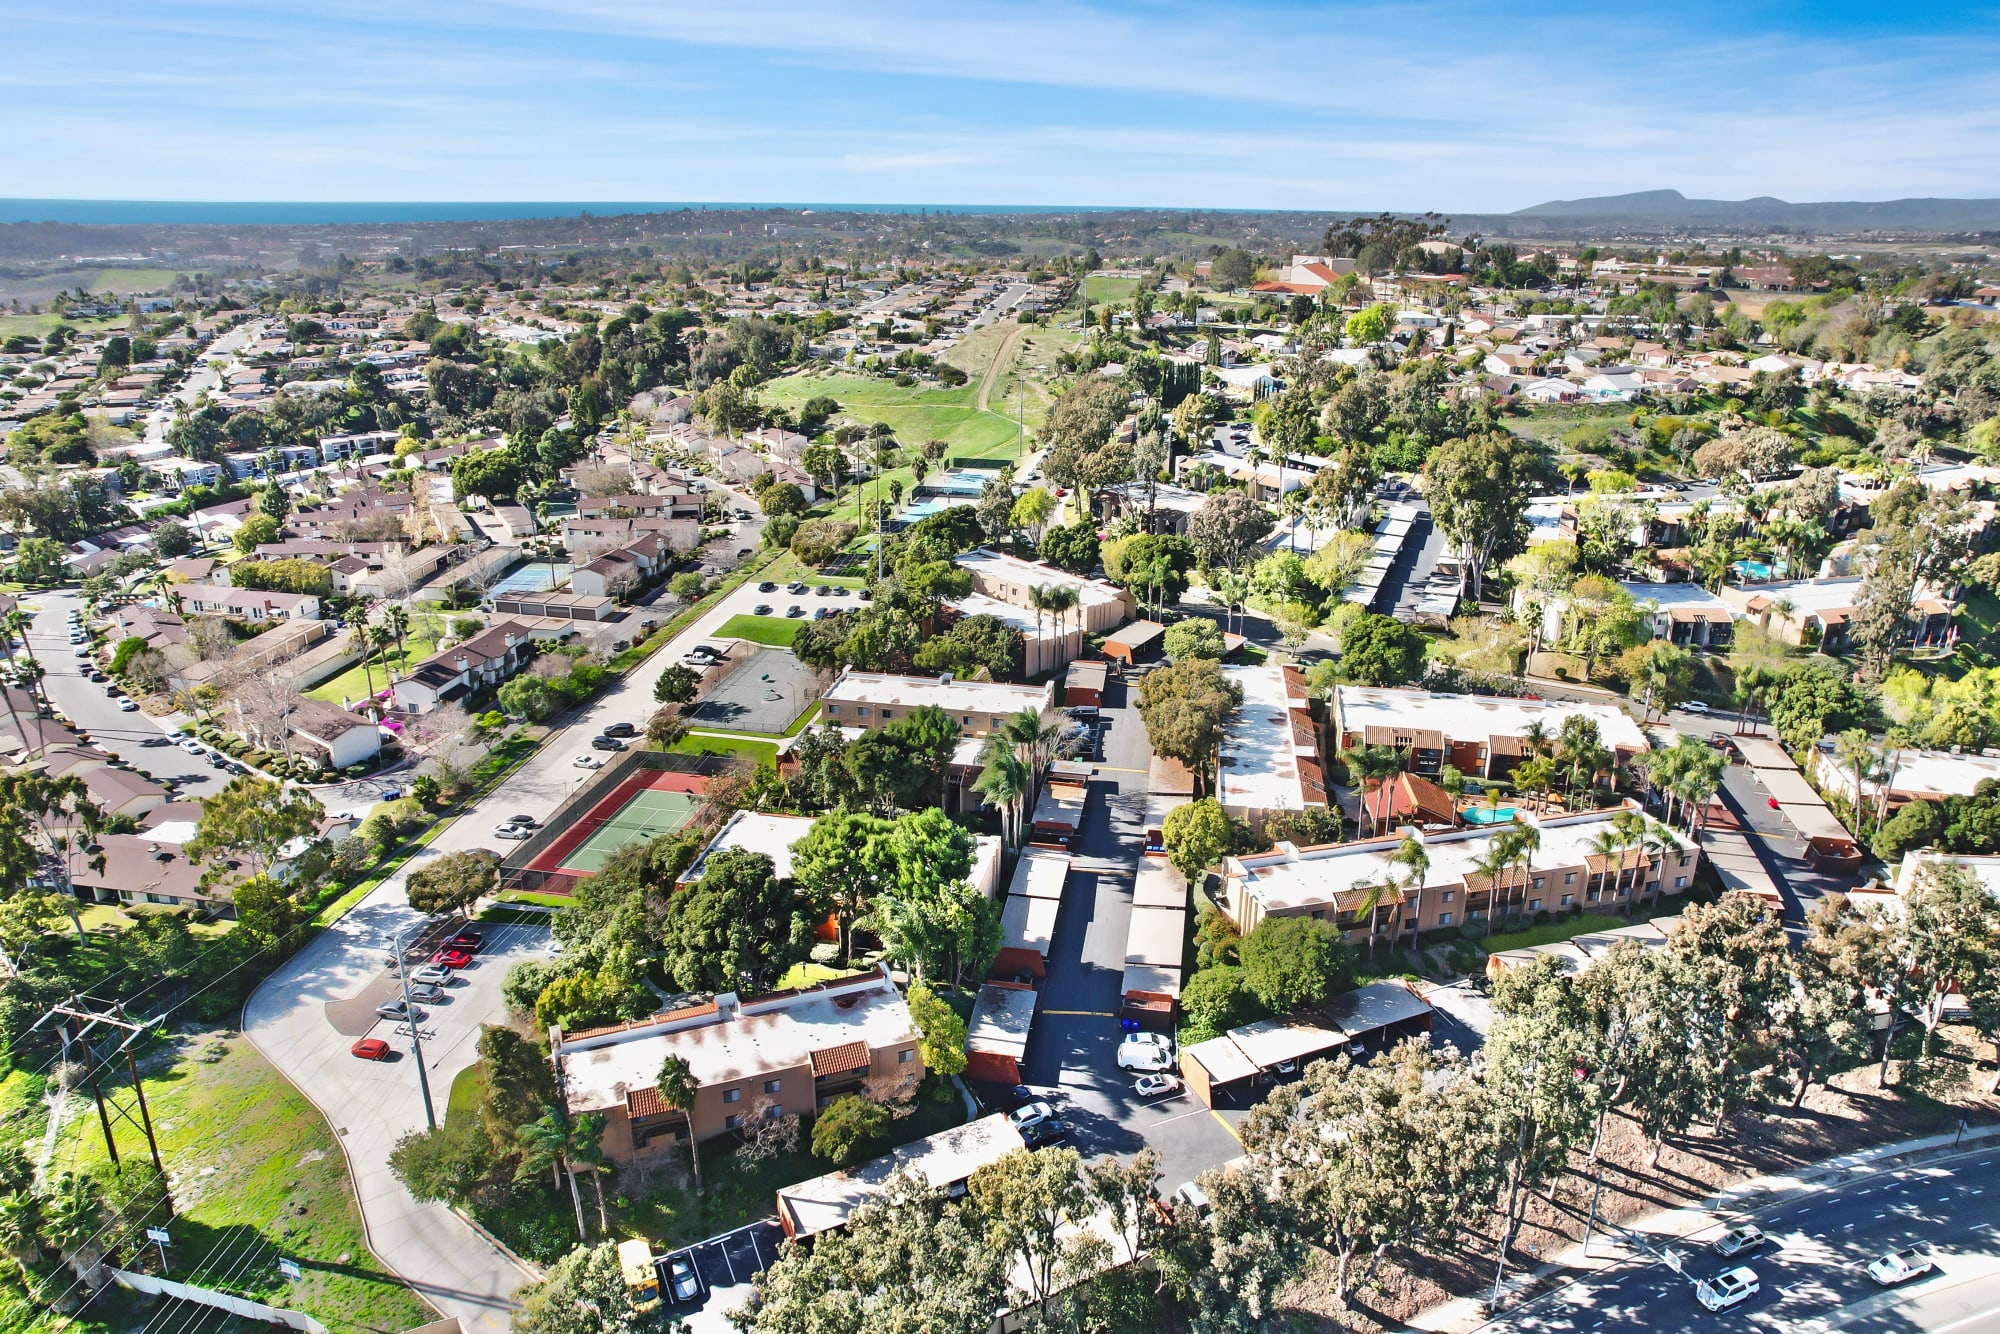 Aerial View of Property at Shadow Ridge Apartments in Oceanside, California